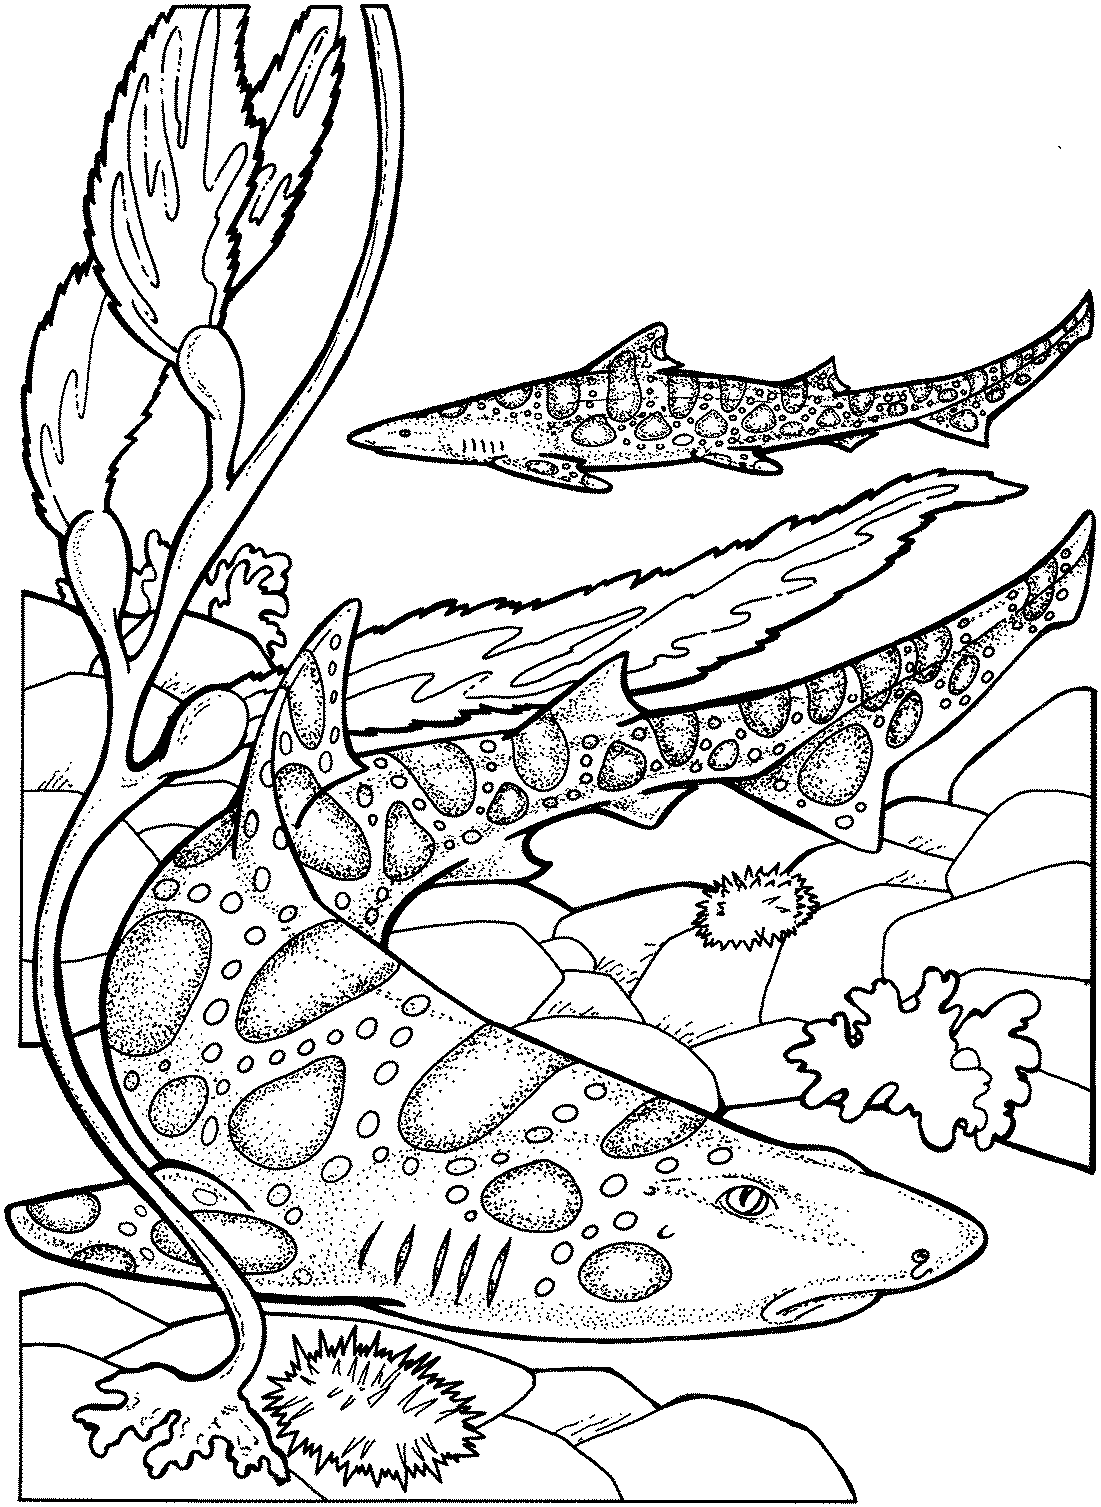 shark color pages free shark coloring pages color pages shark 